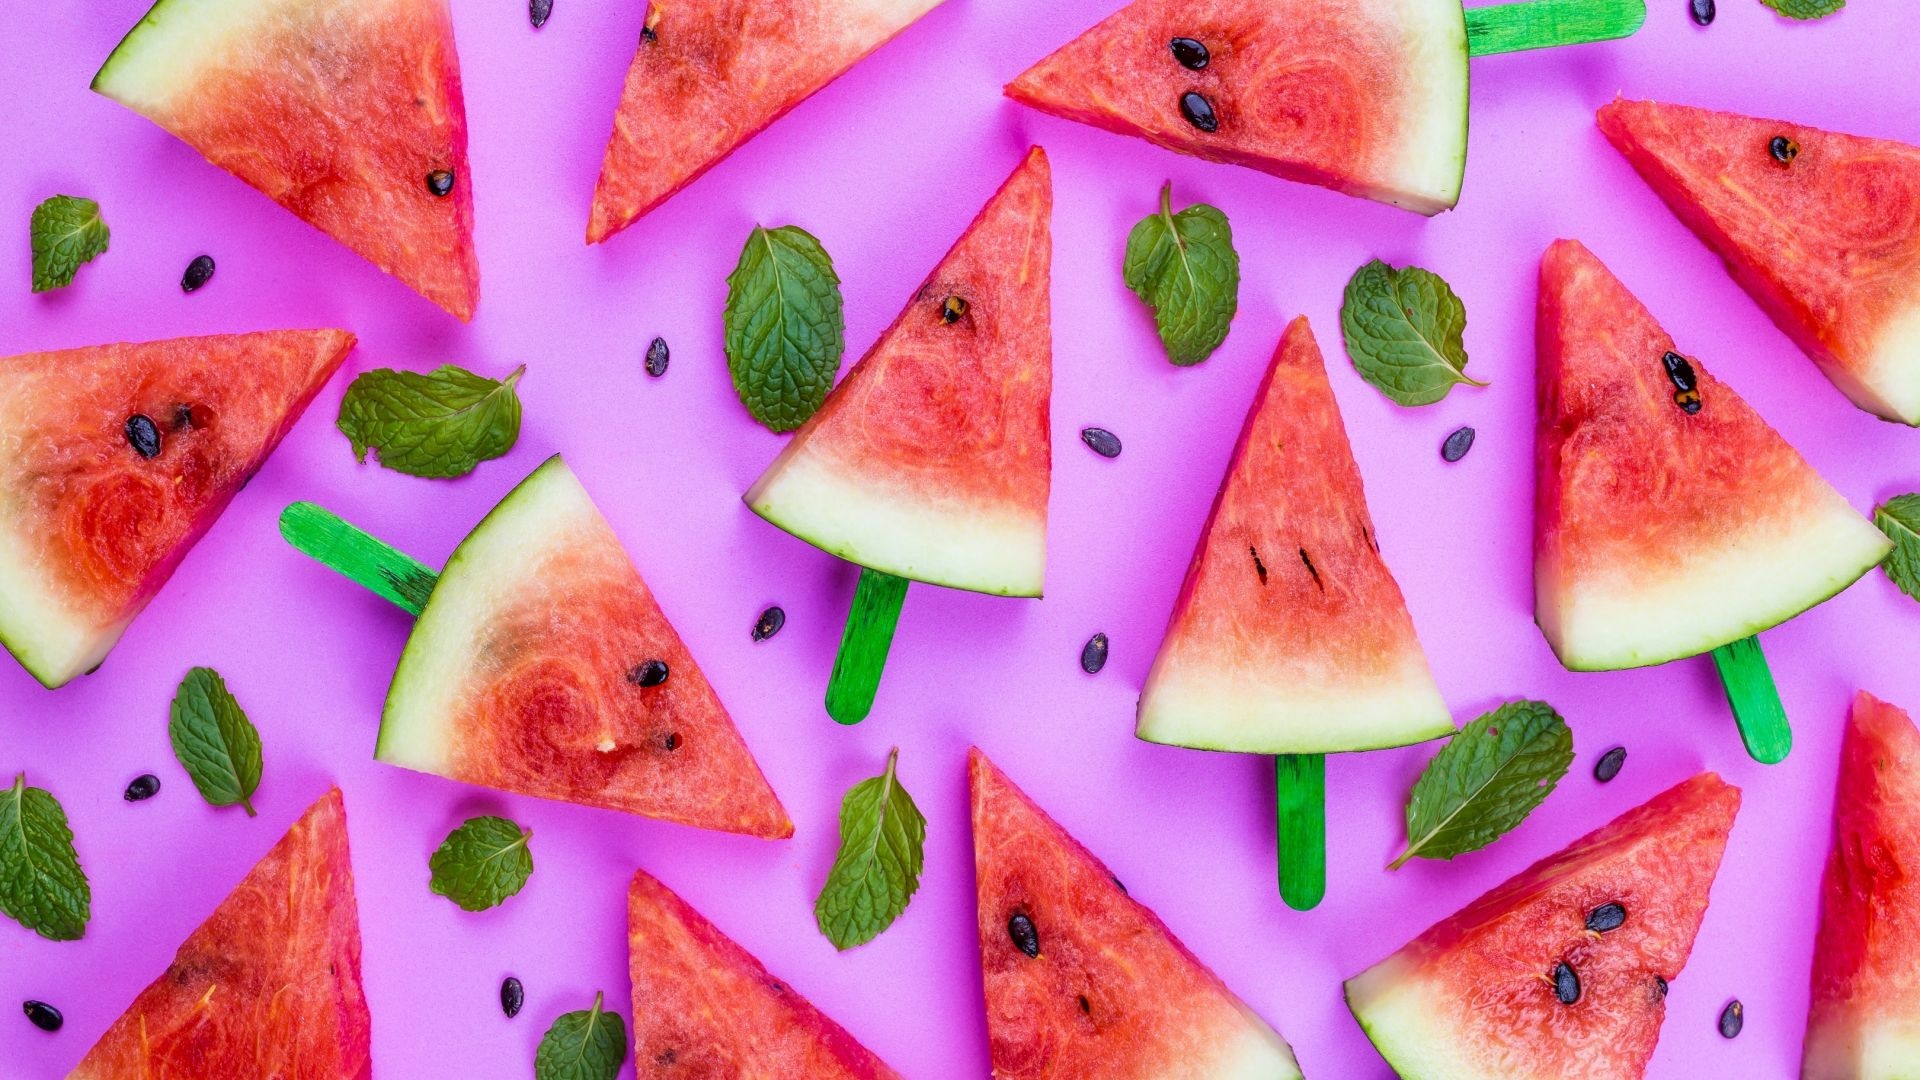 Watermelon: Summer fruit, Leaves, Slice, Natural foods. 1920x1080 Full HD Background.